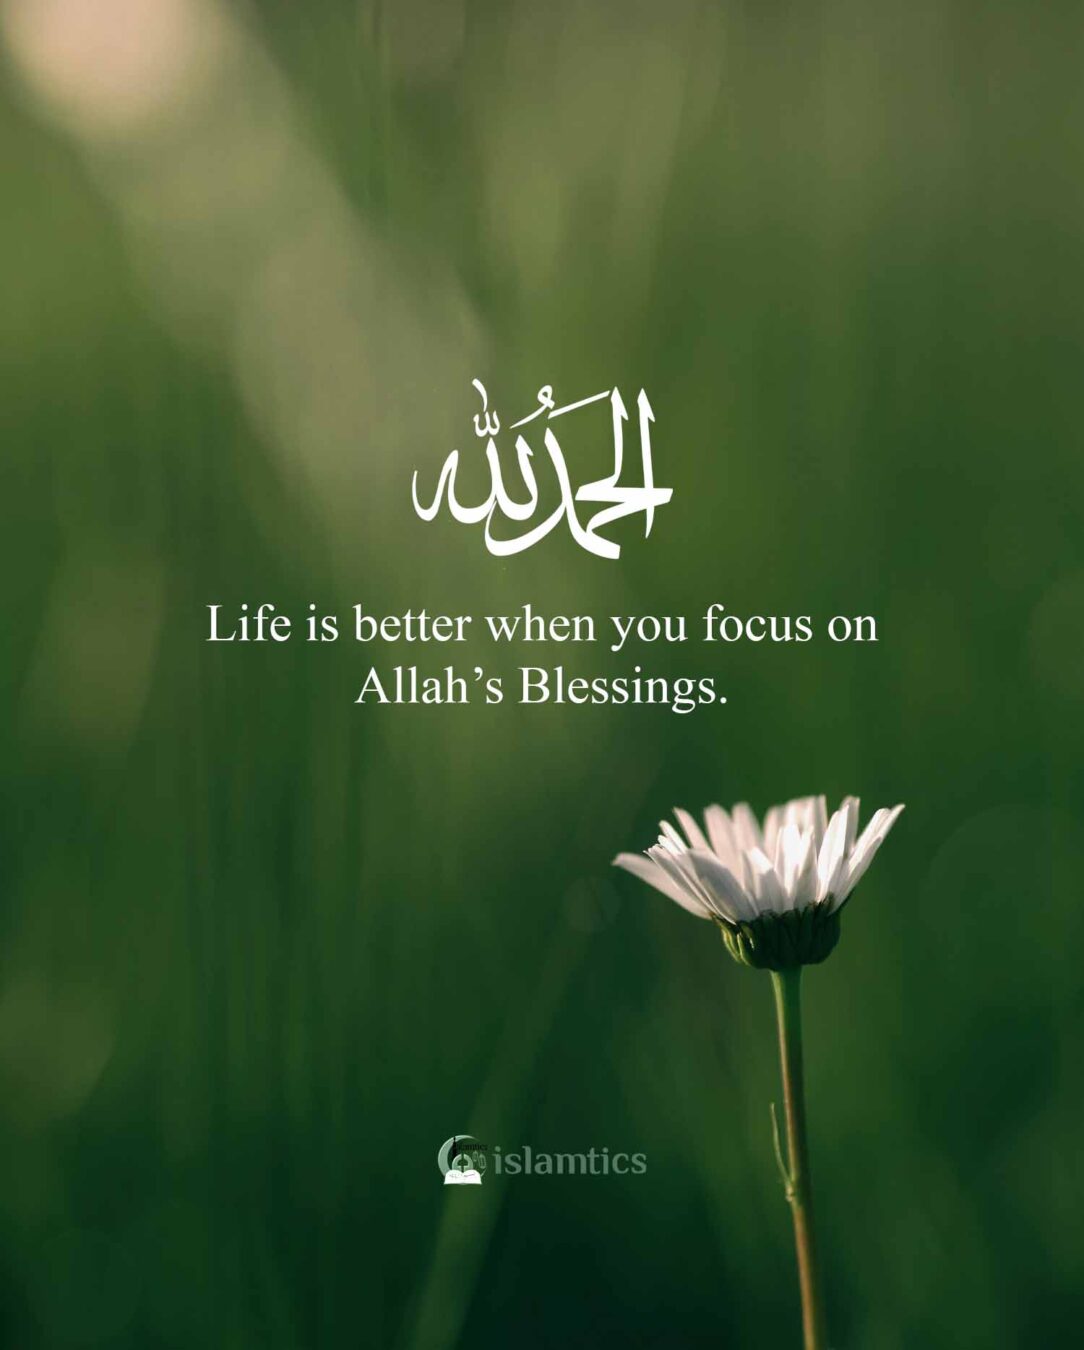 Life is better when you focus on Allah's Blessings. | islamtics